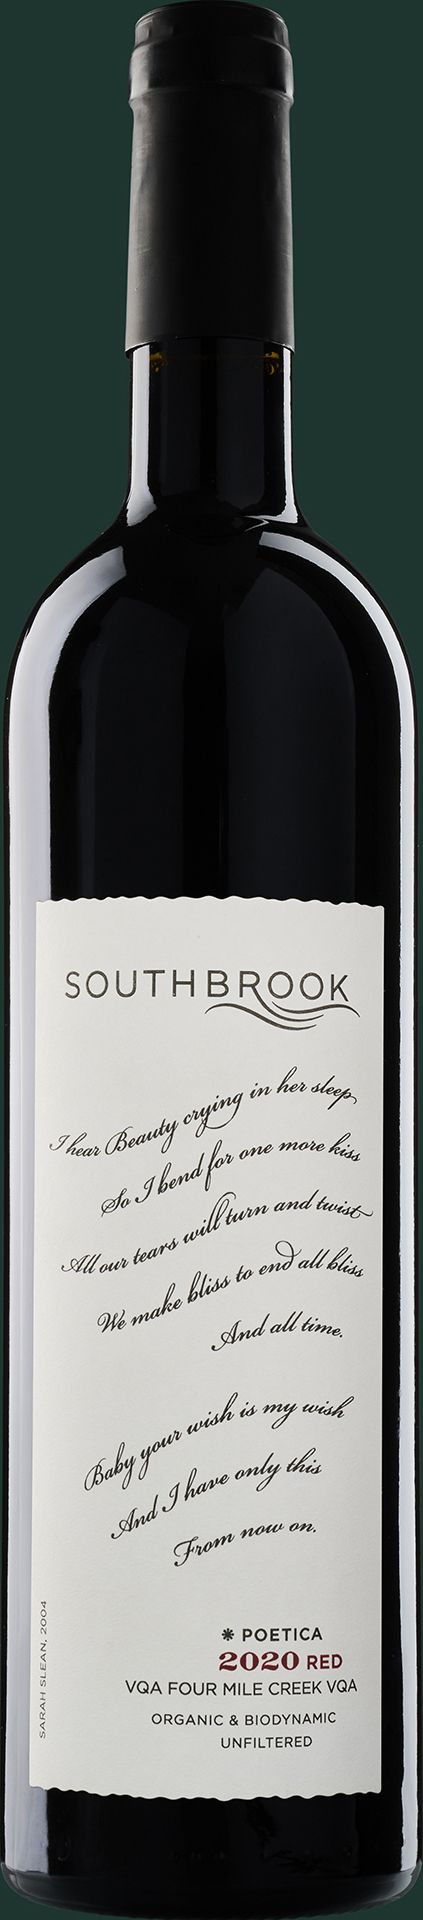 WBSS24 Southbrook Vineyards Poetica Red 2020